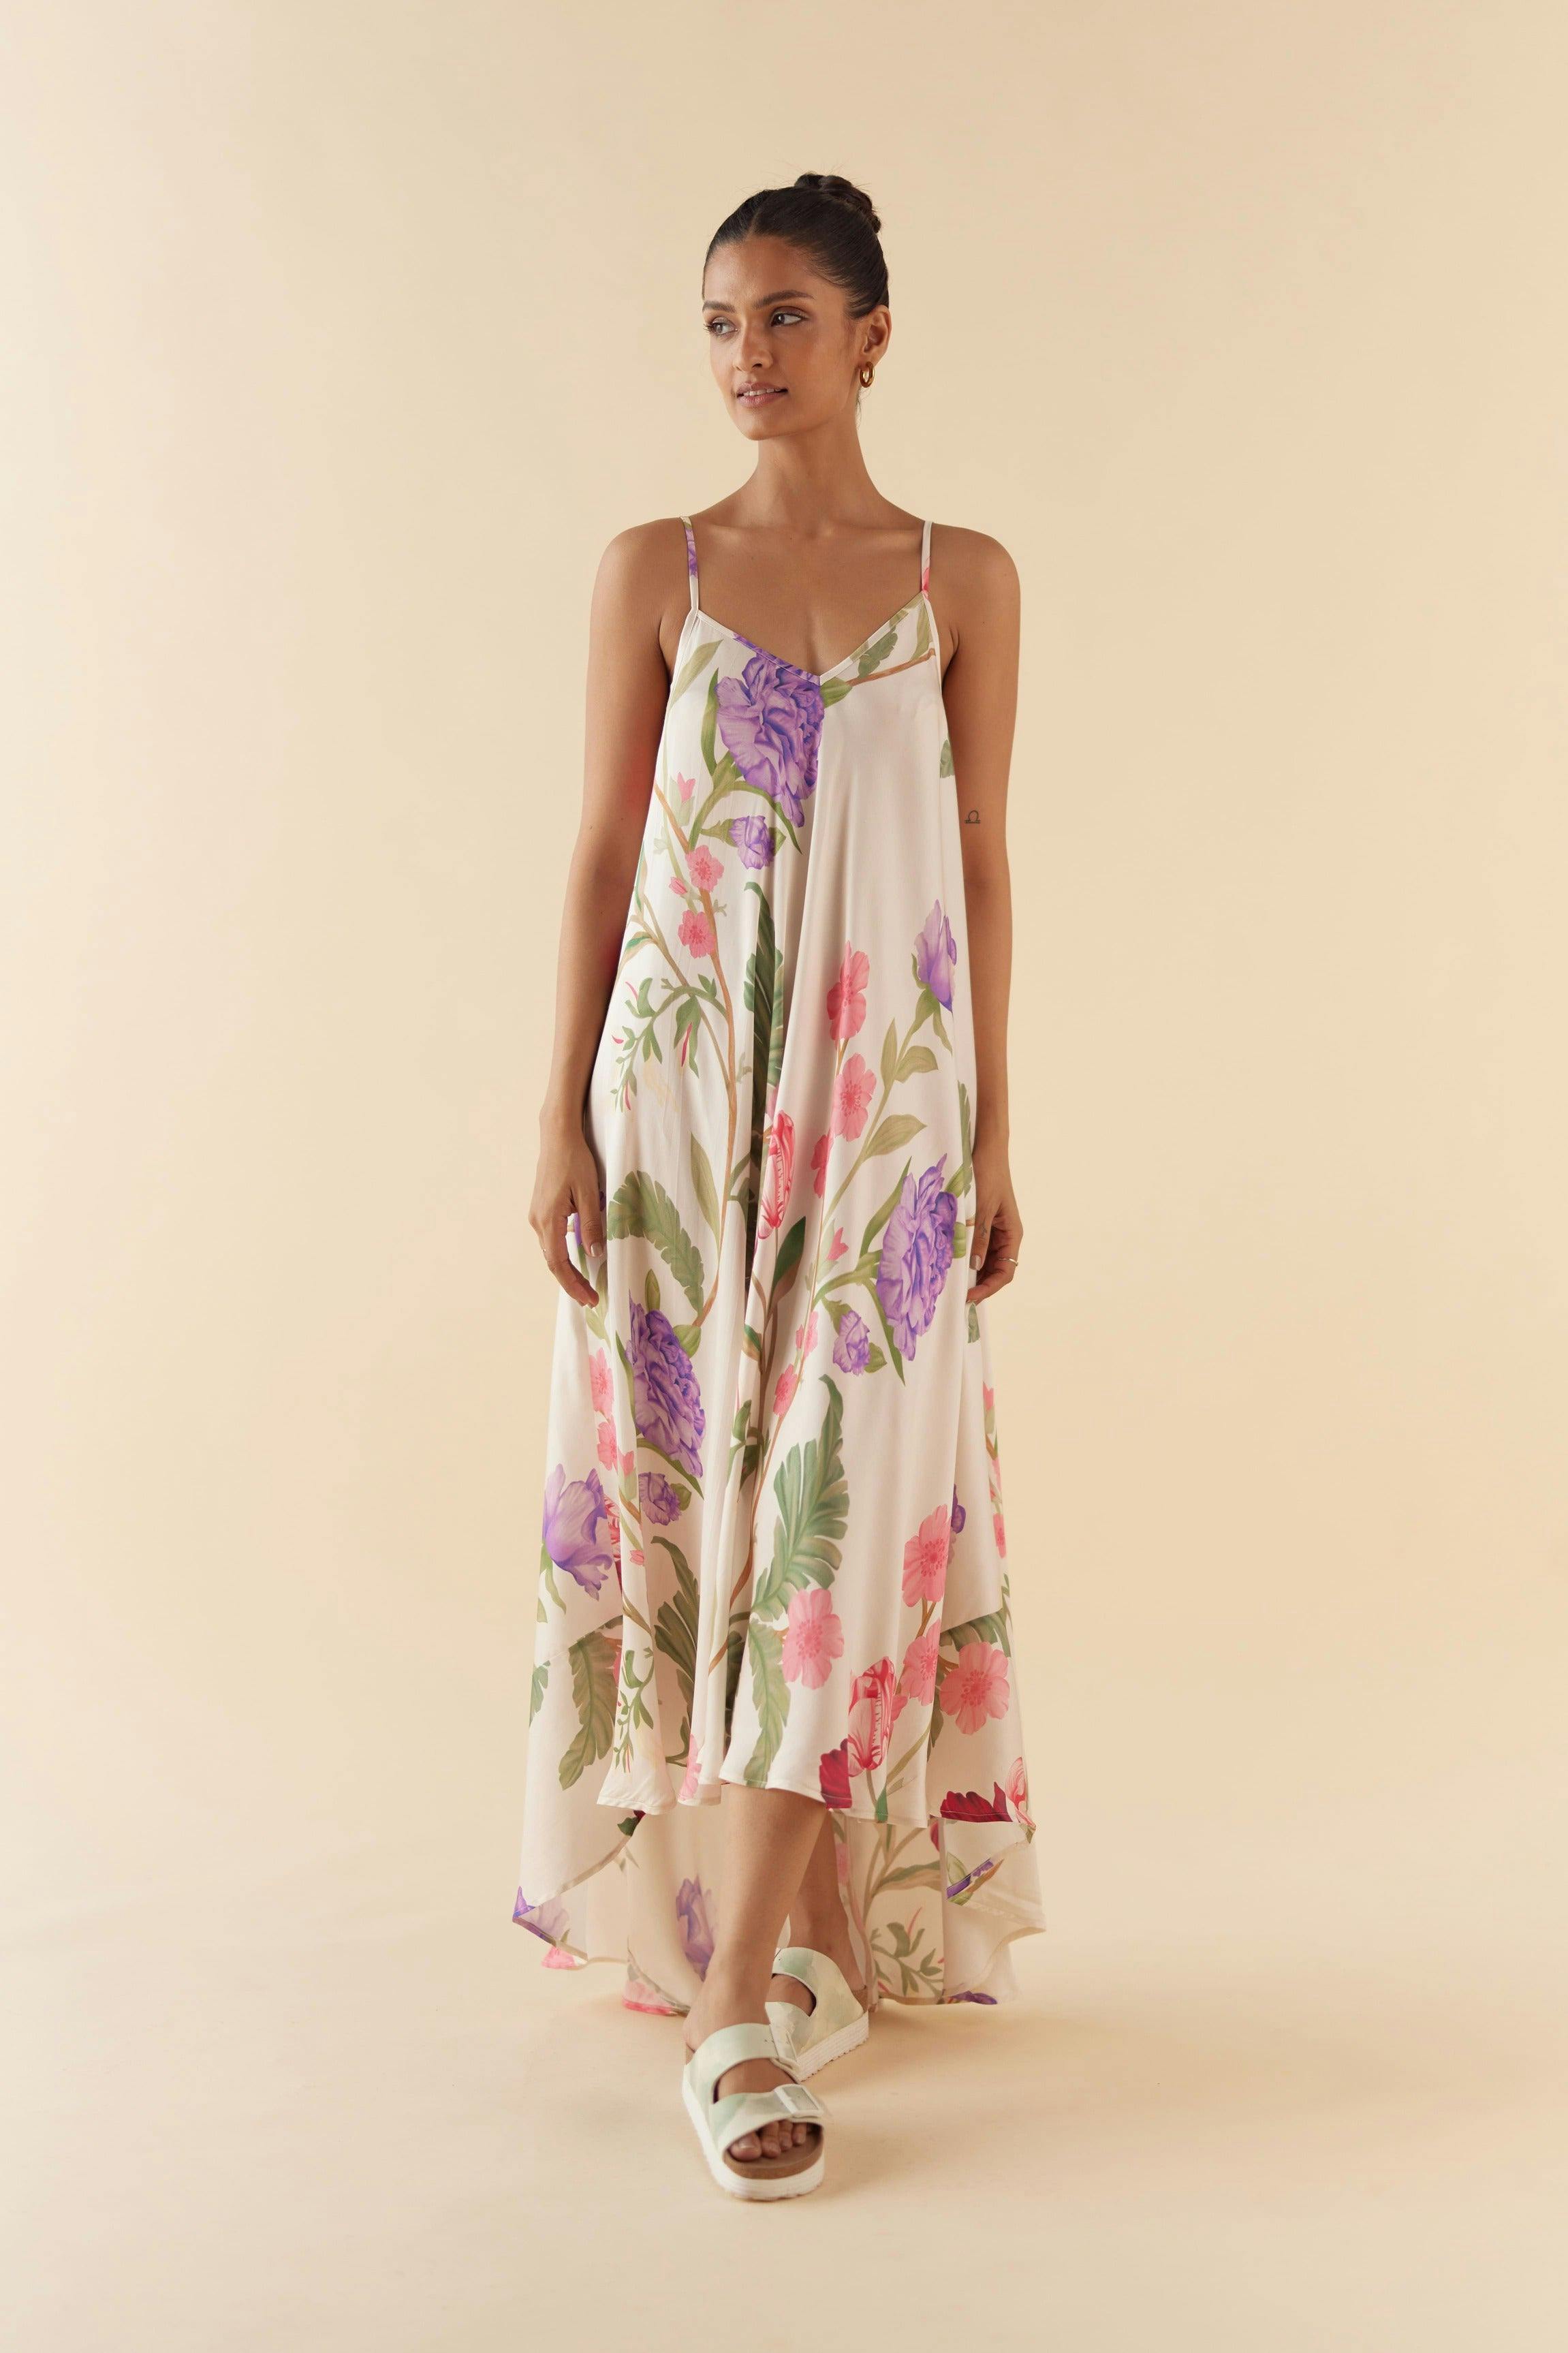 Floral Dream Lounge Cami Dress, a product by Sleeplove